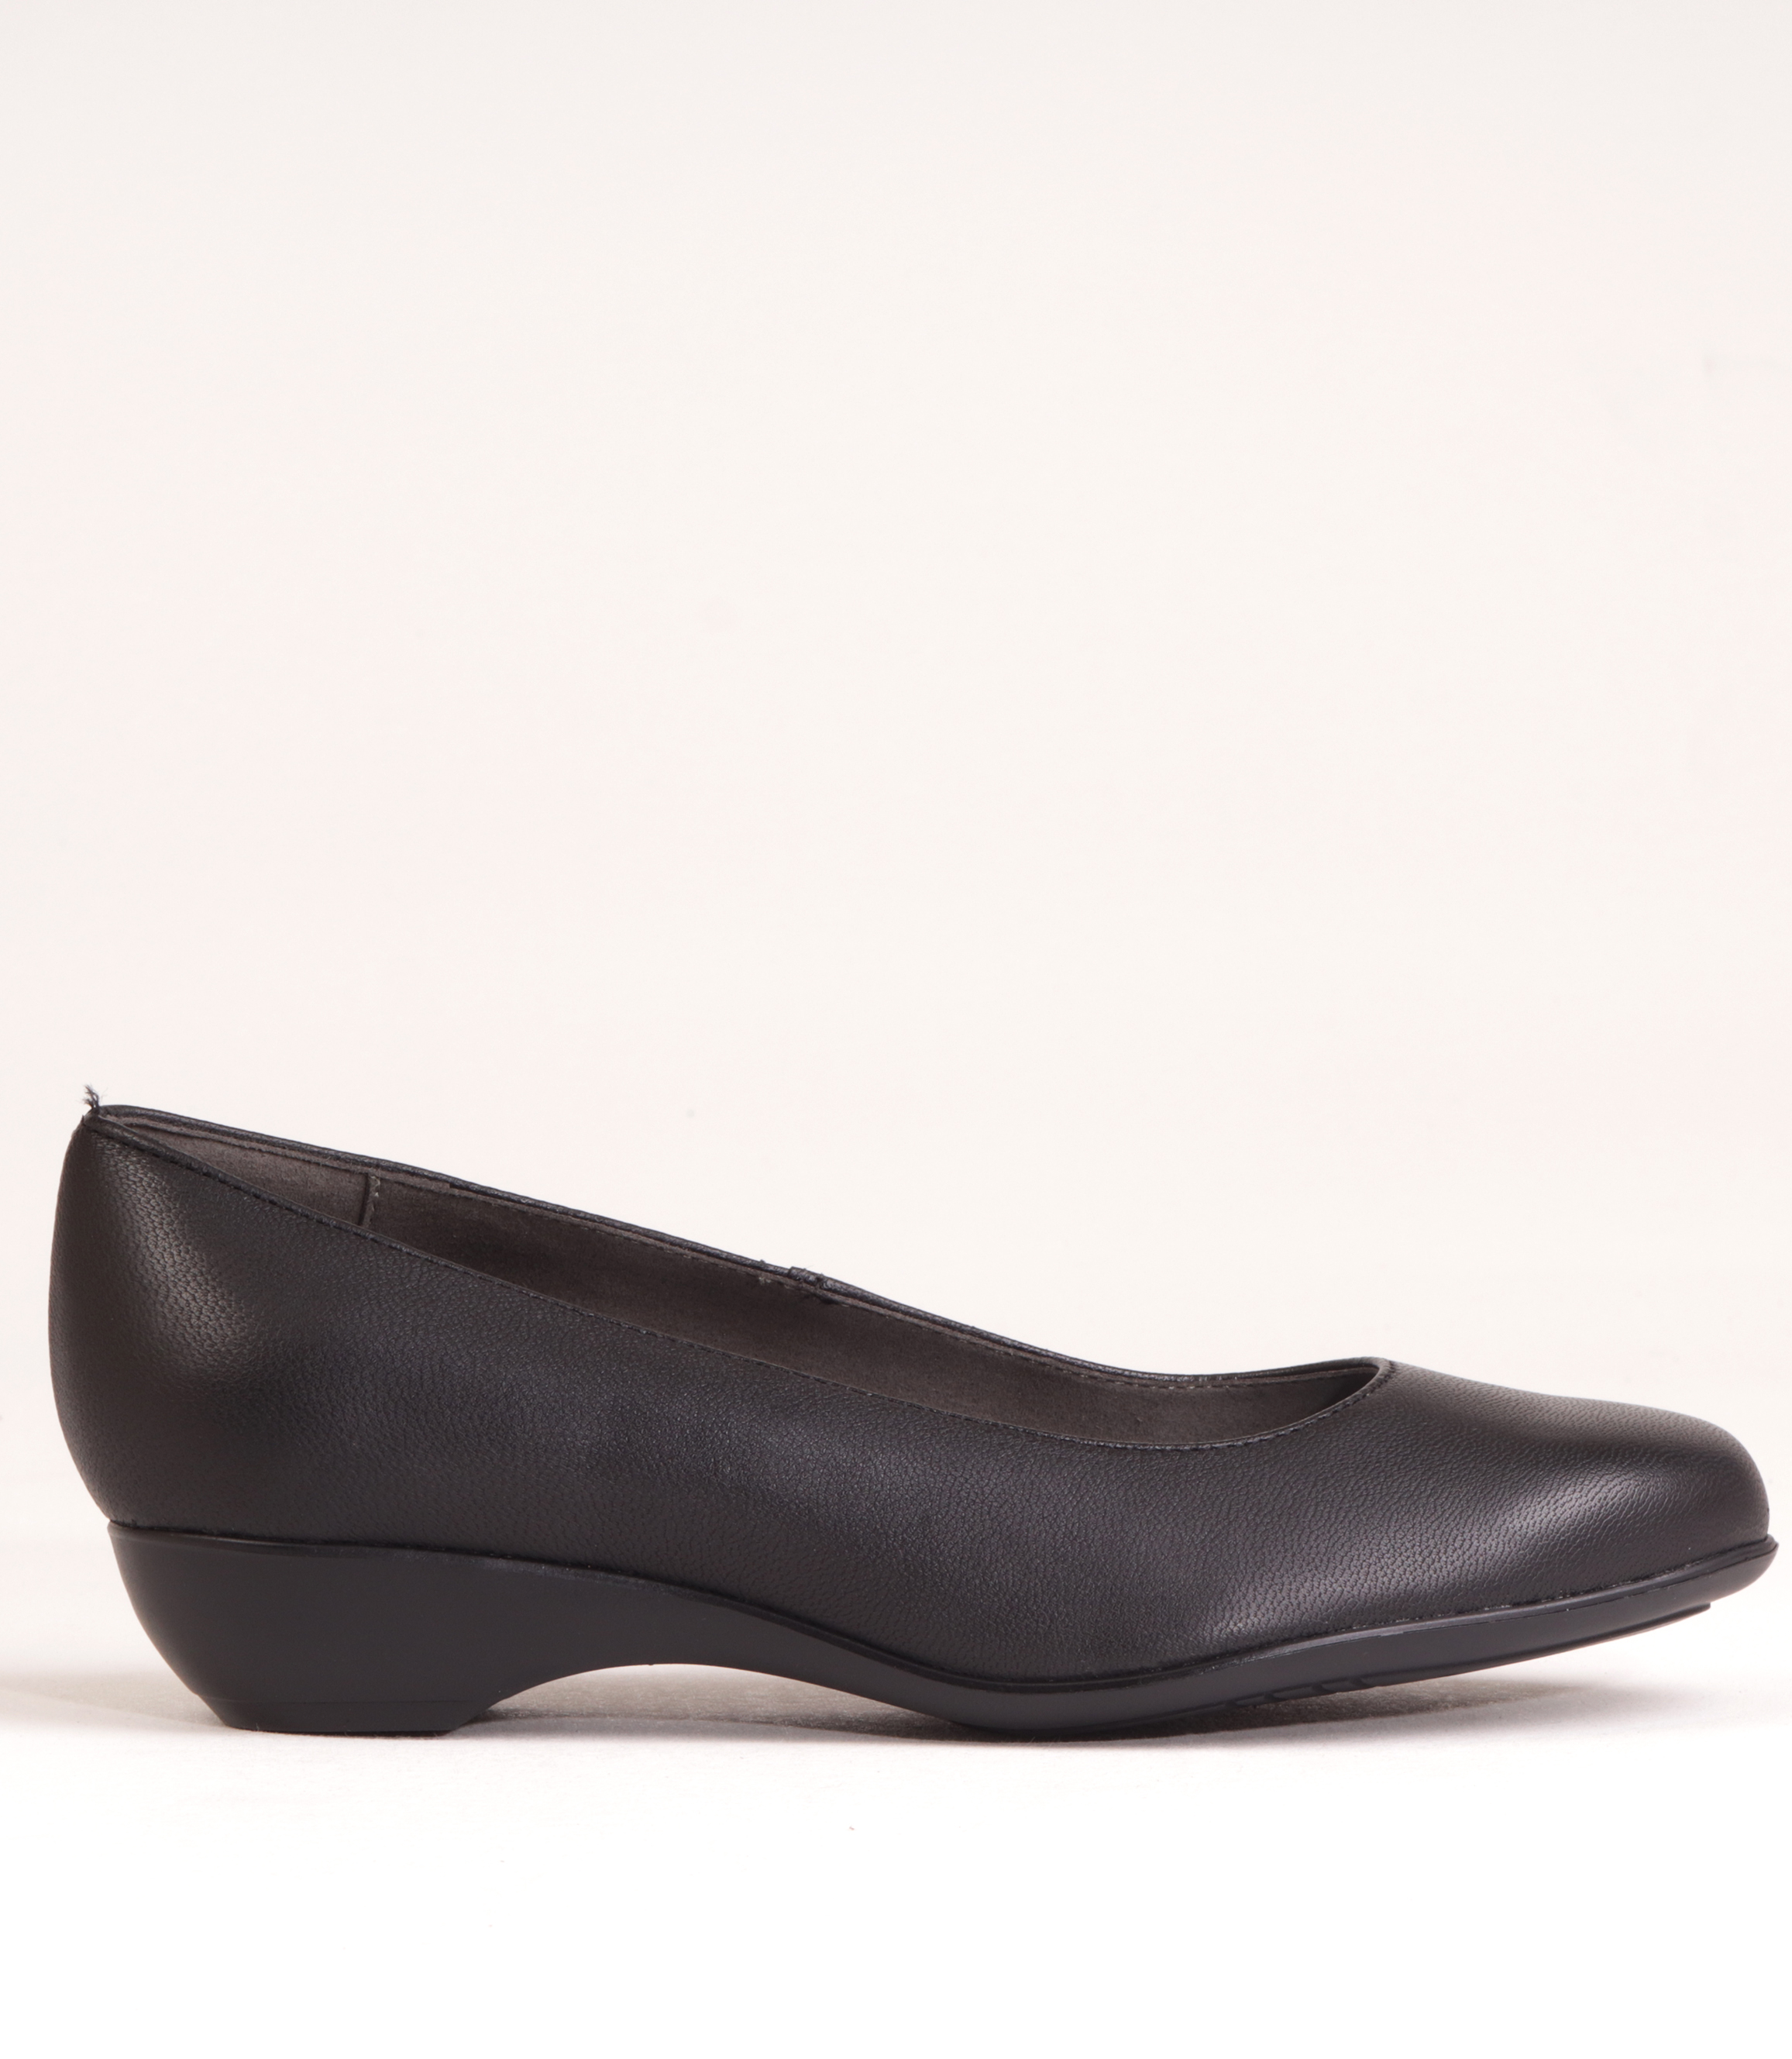 FROGGIE BLACK LEATHER COURT SHOE | Rosella - Style inspired by elegance